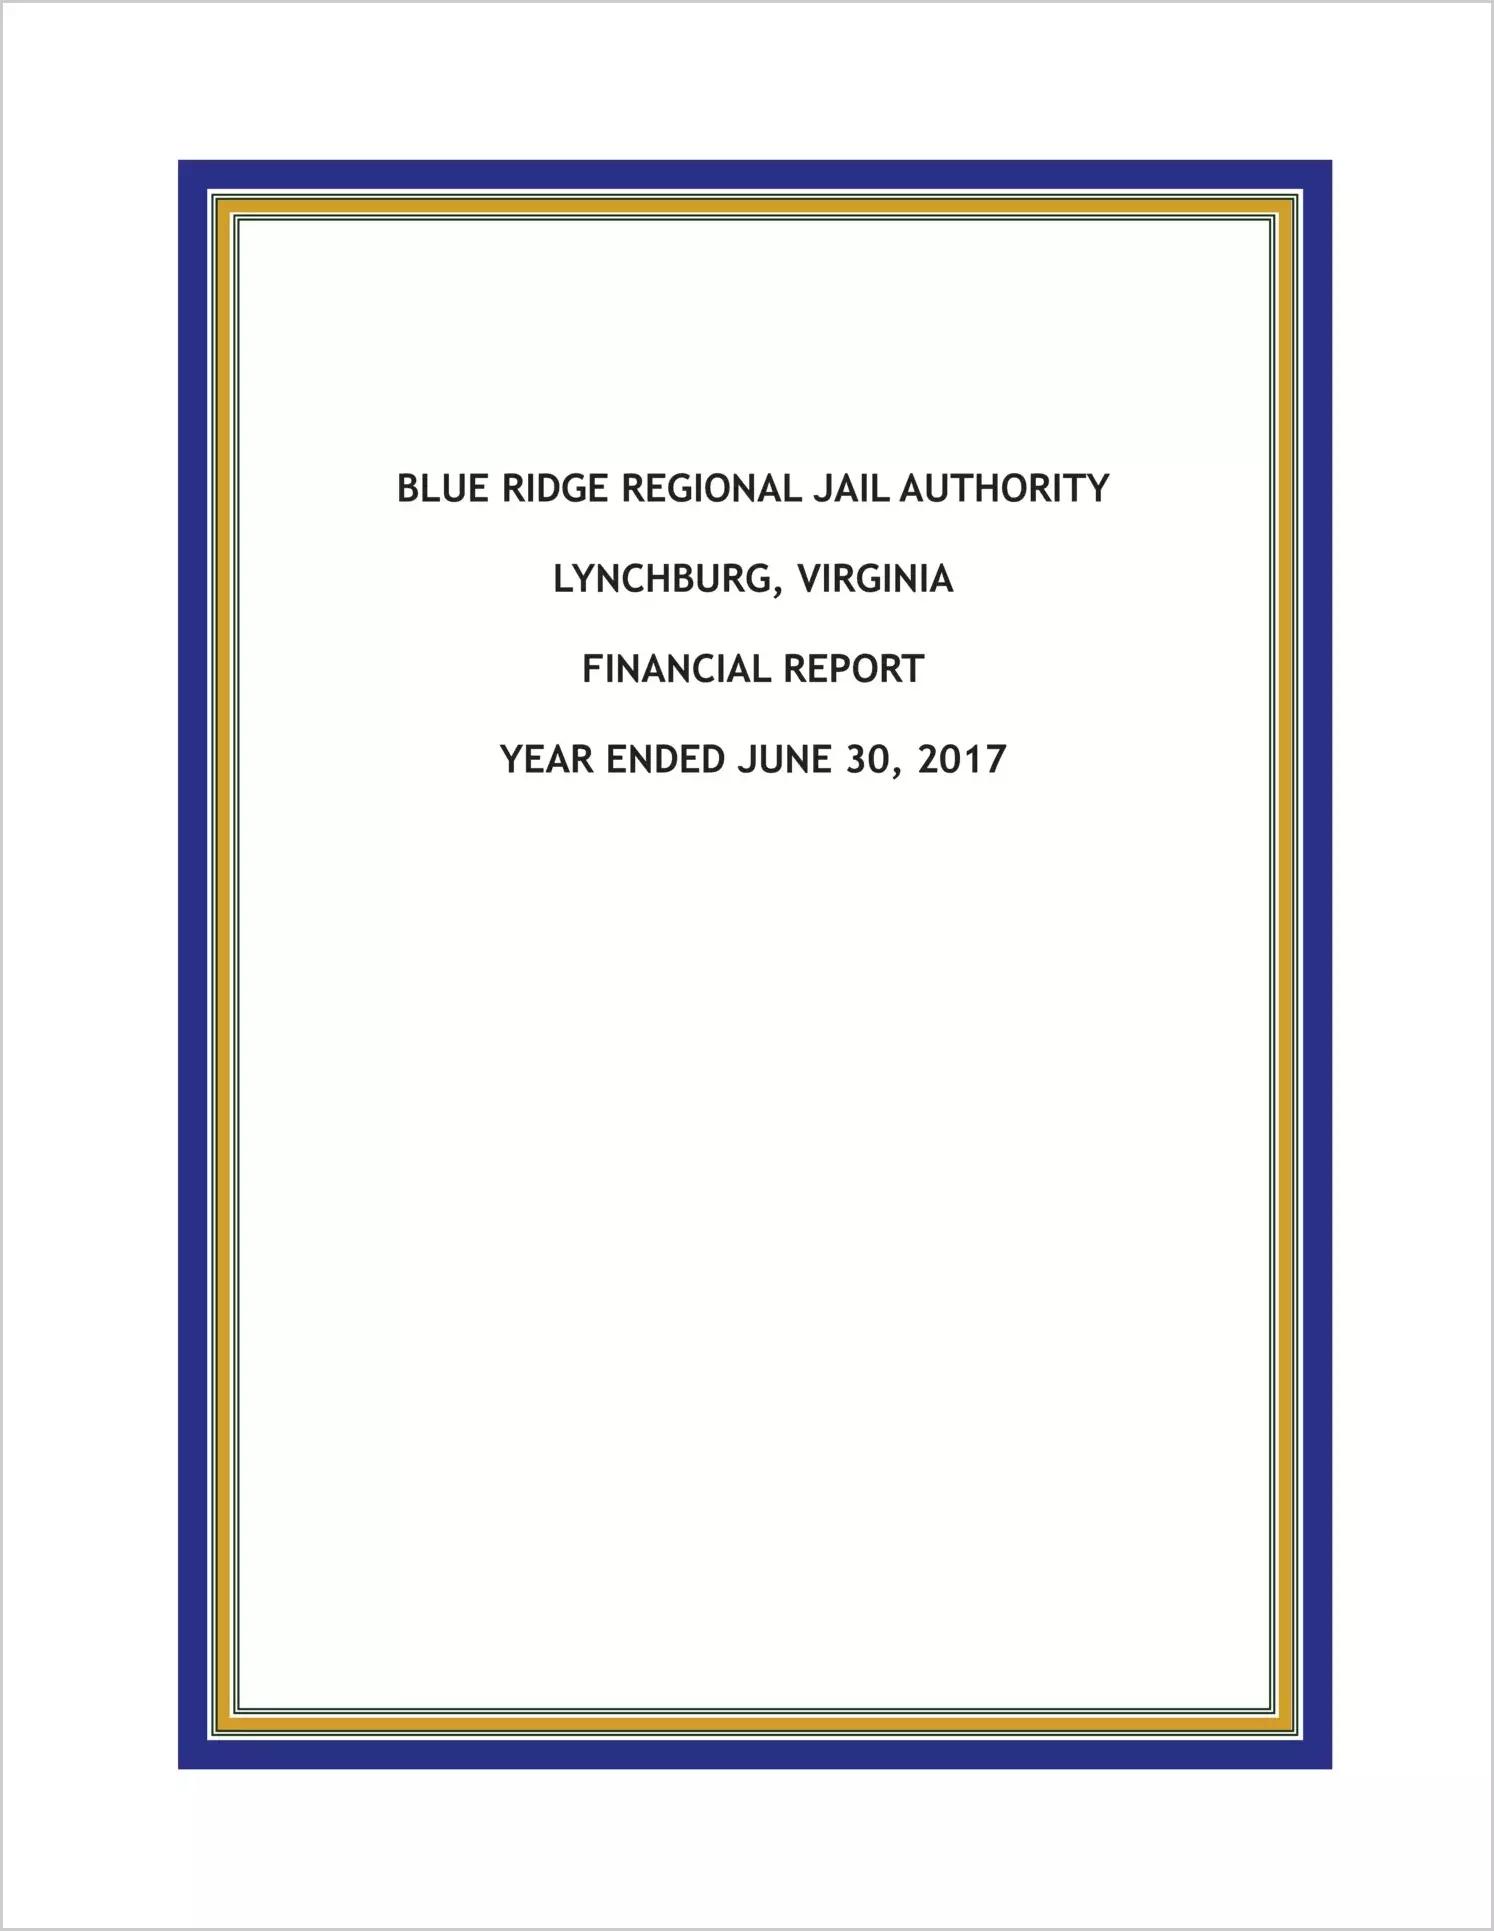 2017 ABC/Other Annual Financial Report  for Blue Ridge Regional Jail Authority